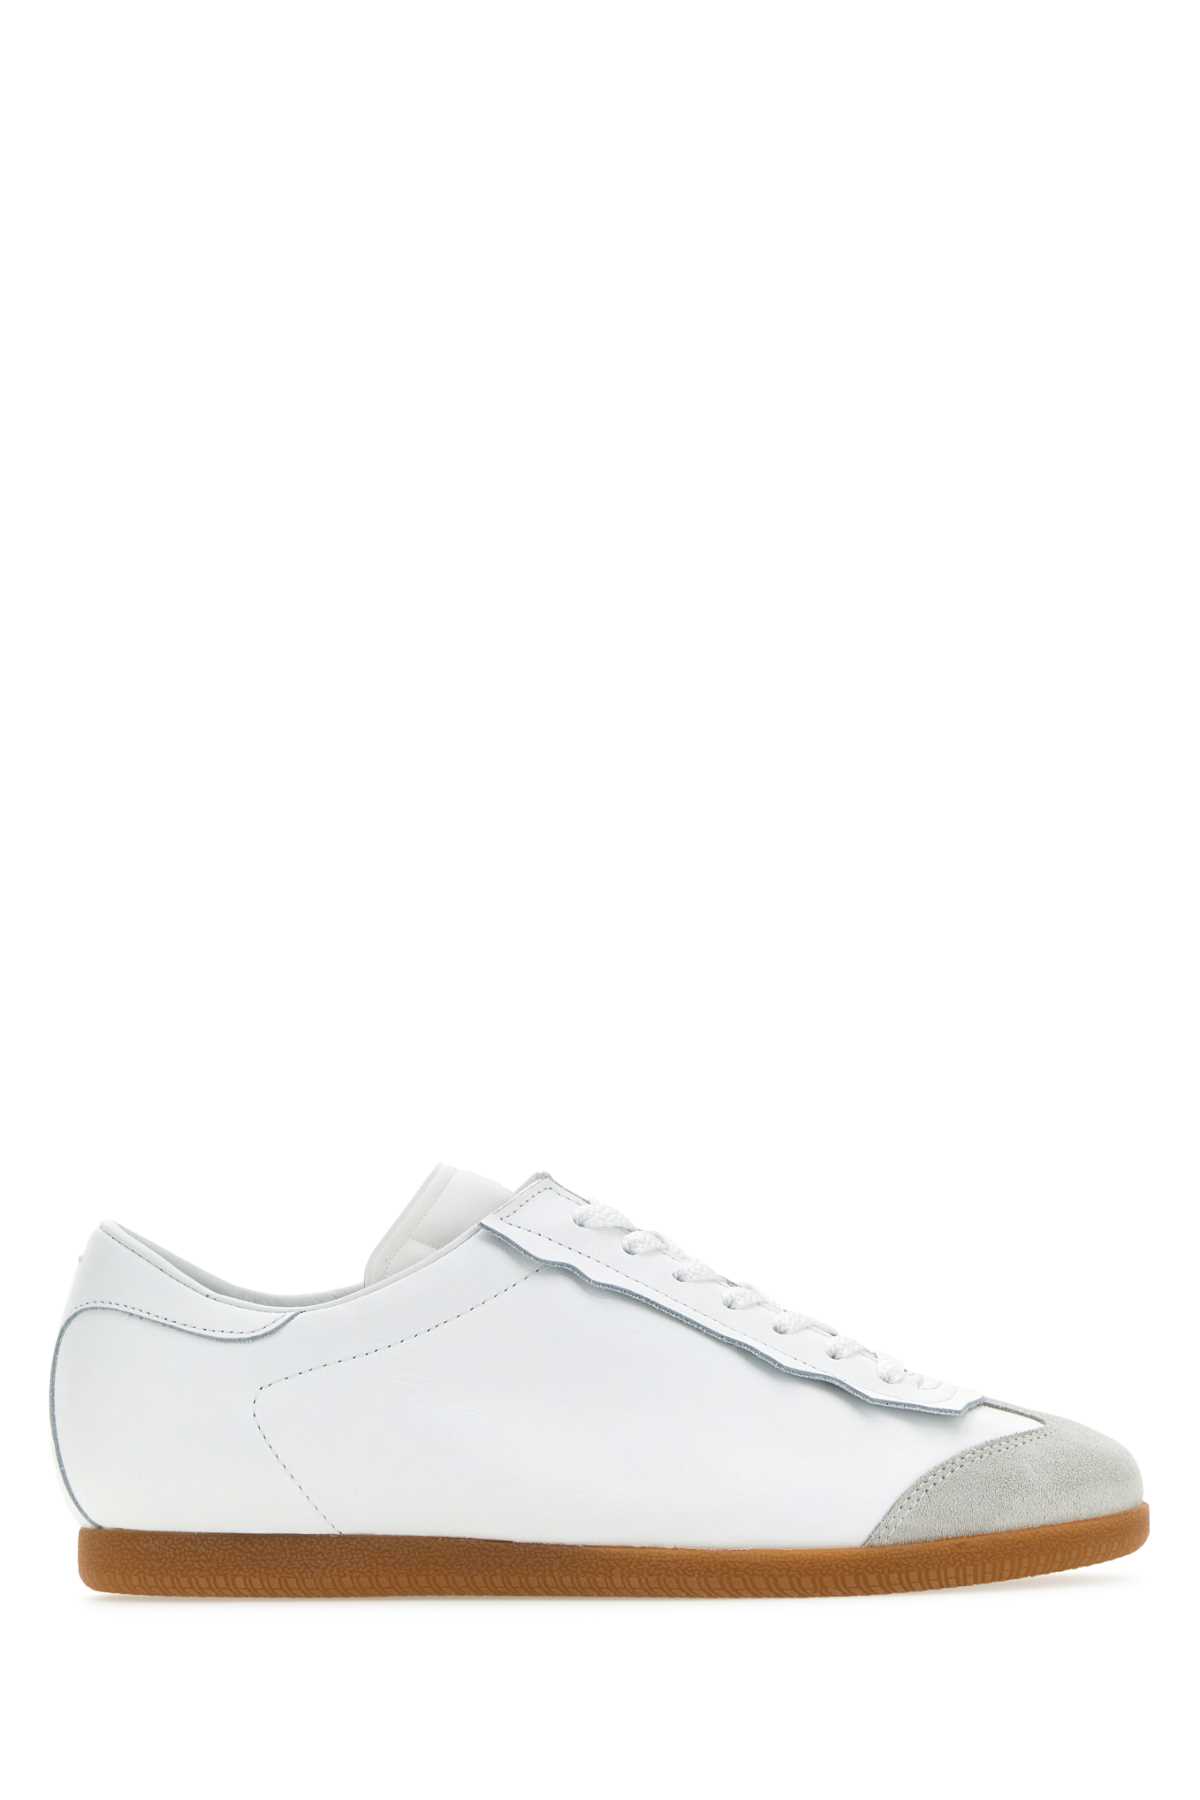 Maison Margiela White Leather Featherlight Trainers In T1003